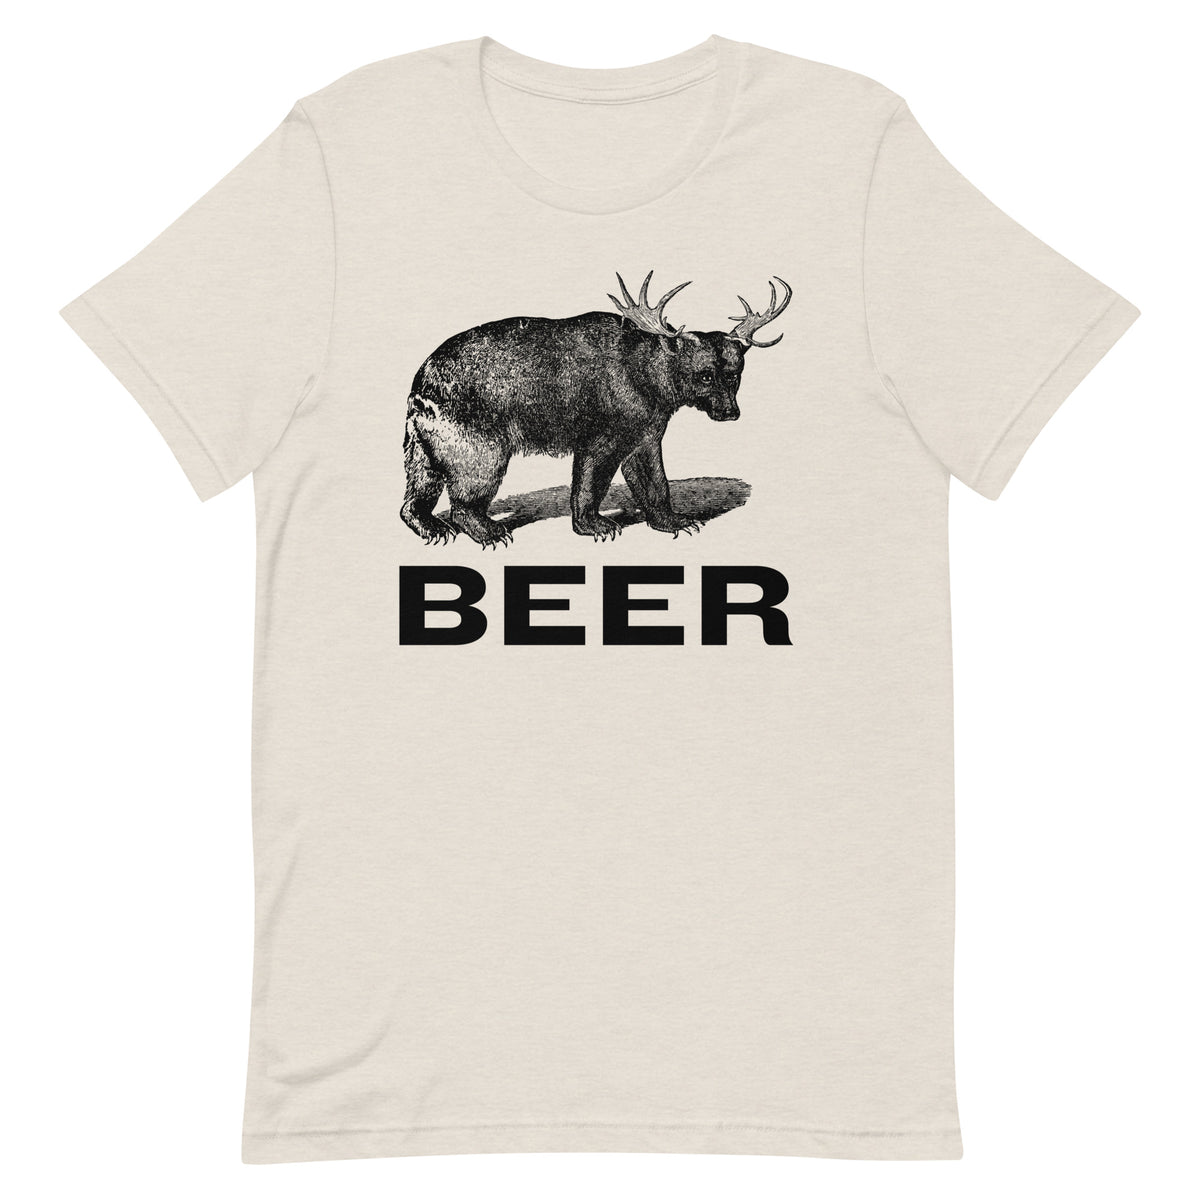 Beer Graphic T-Shirt